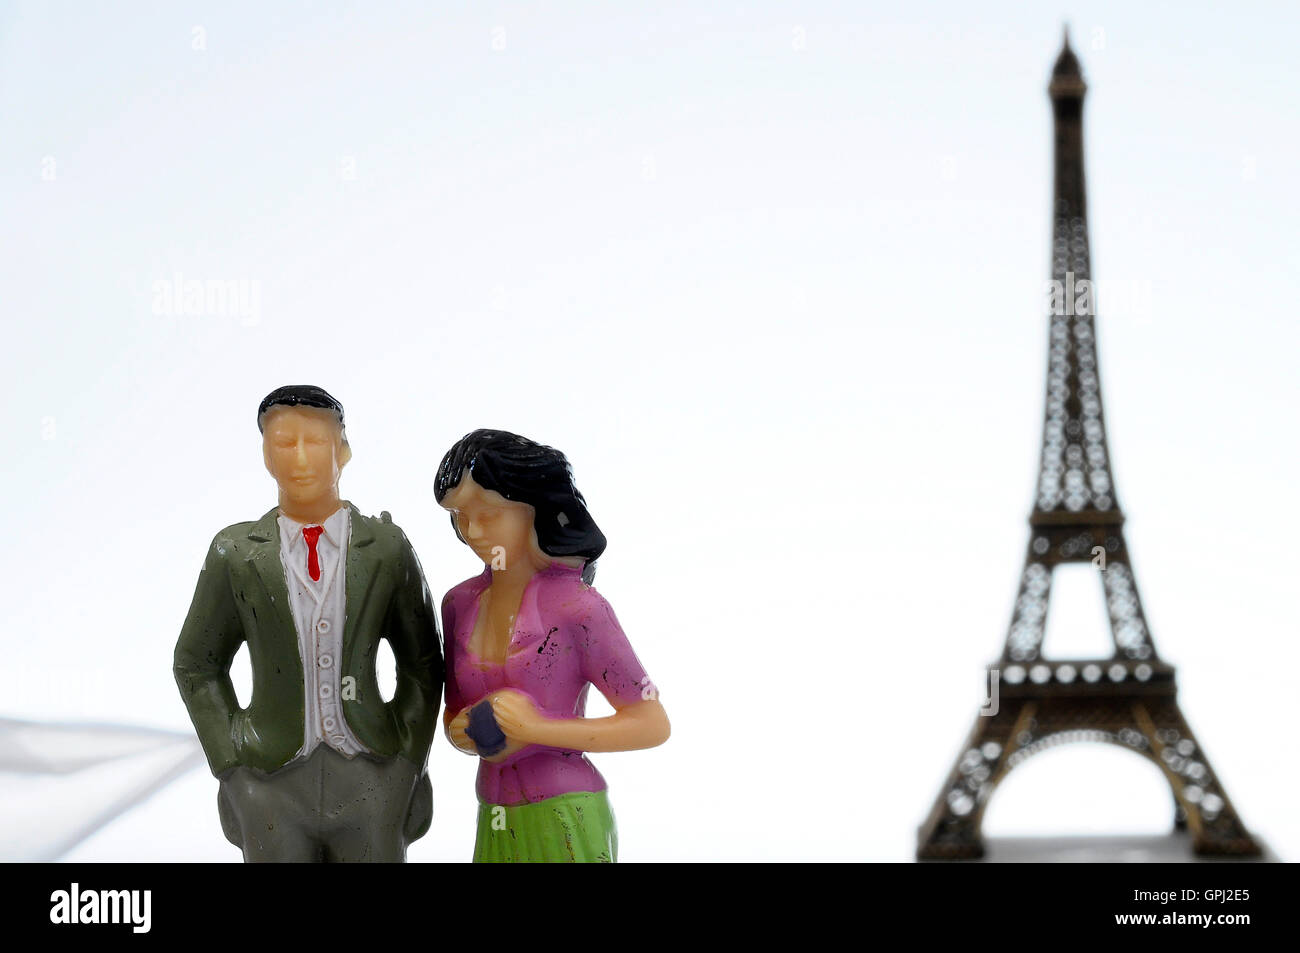 Scene of french people miniature figures in front of Paris Eiffel tower Stock Photo